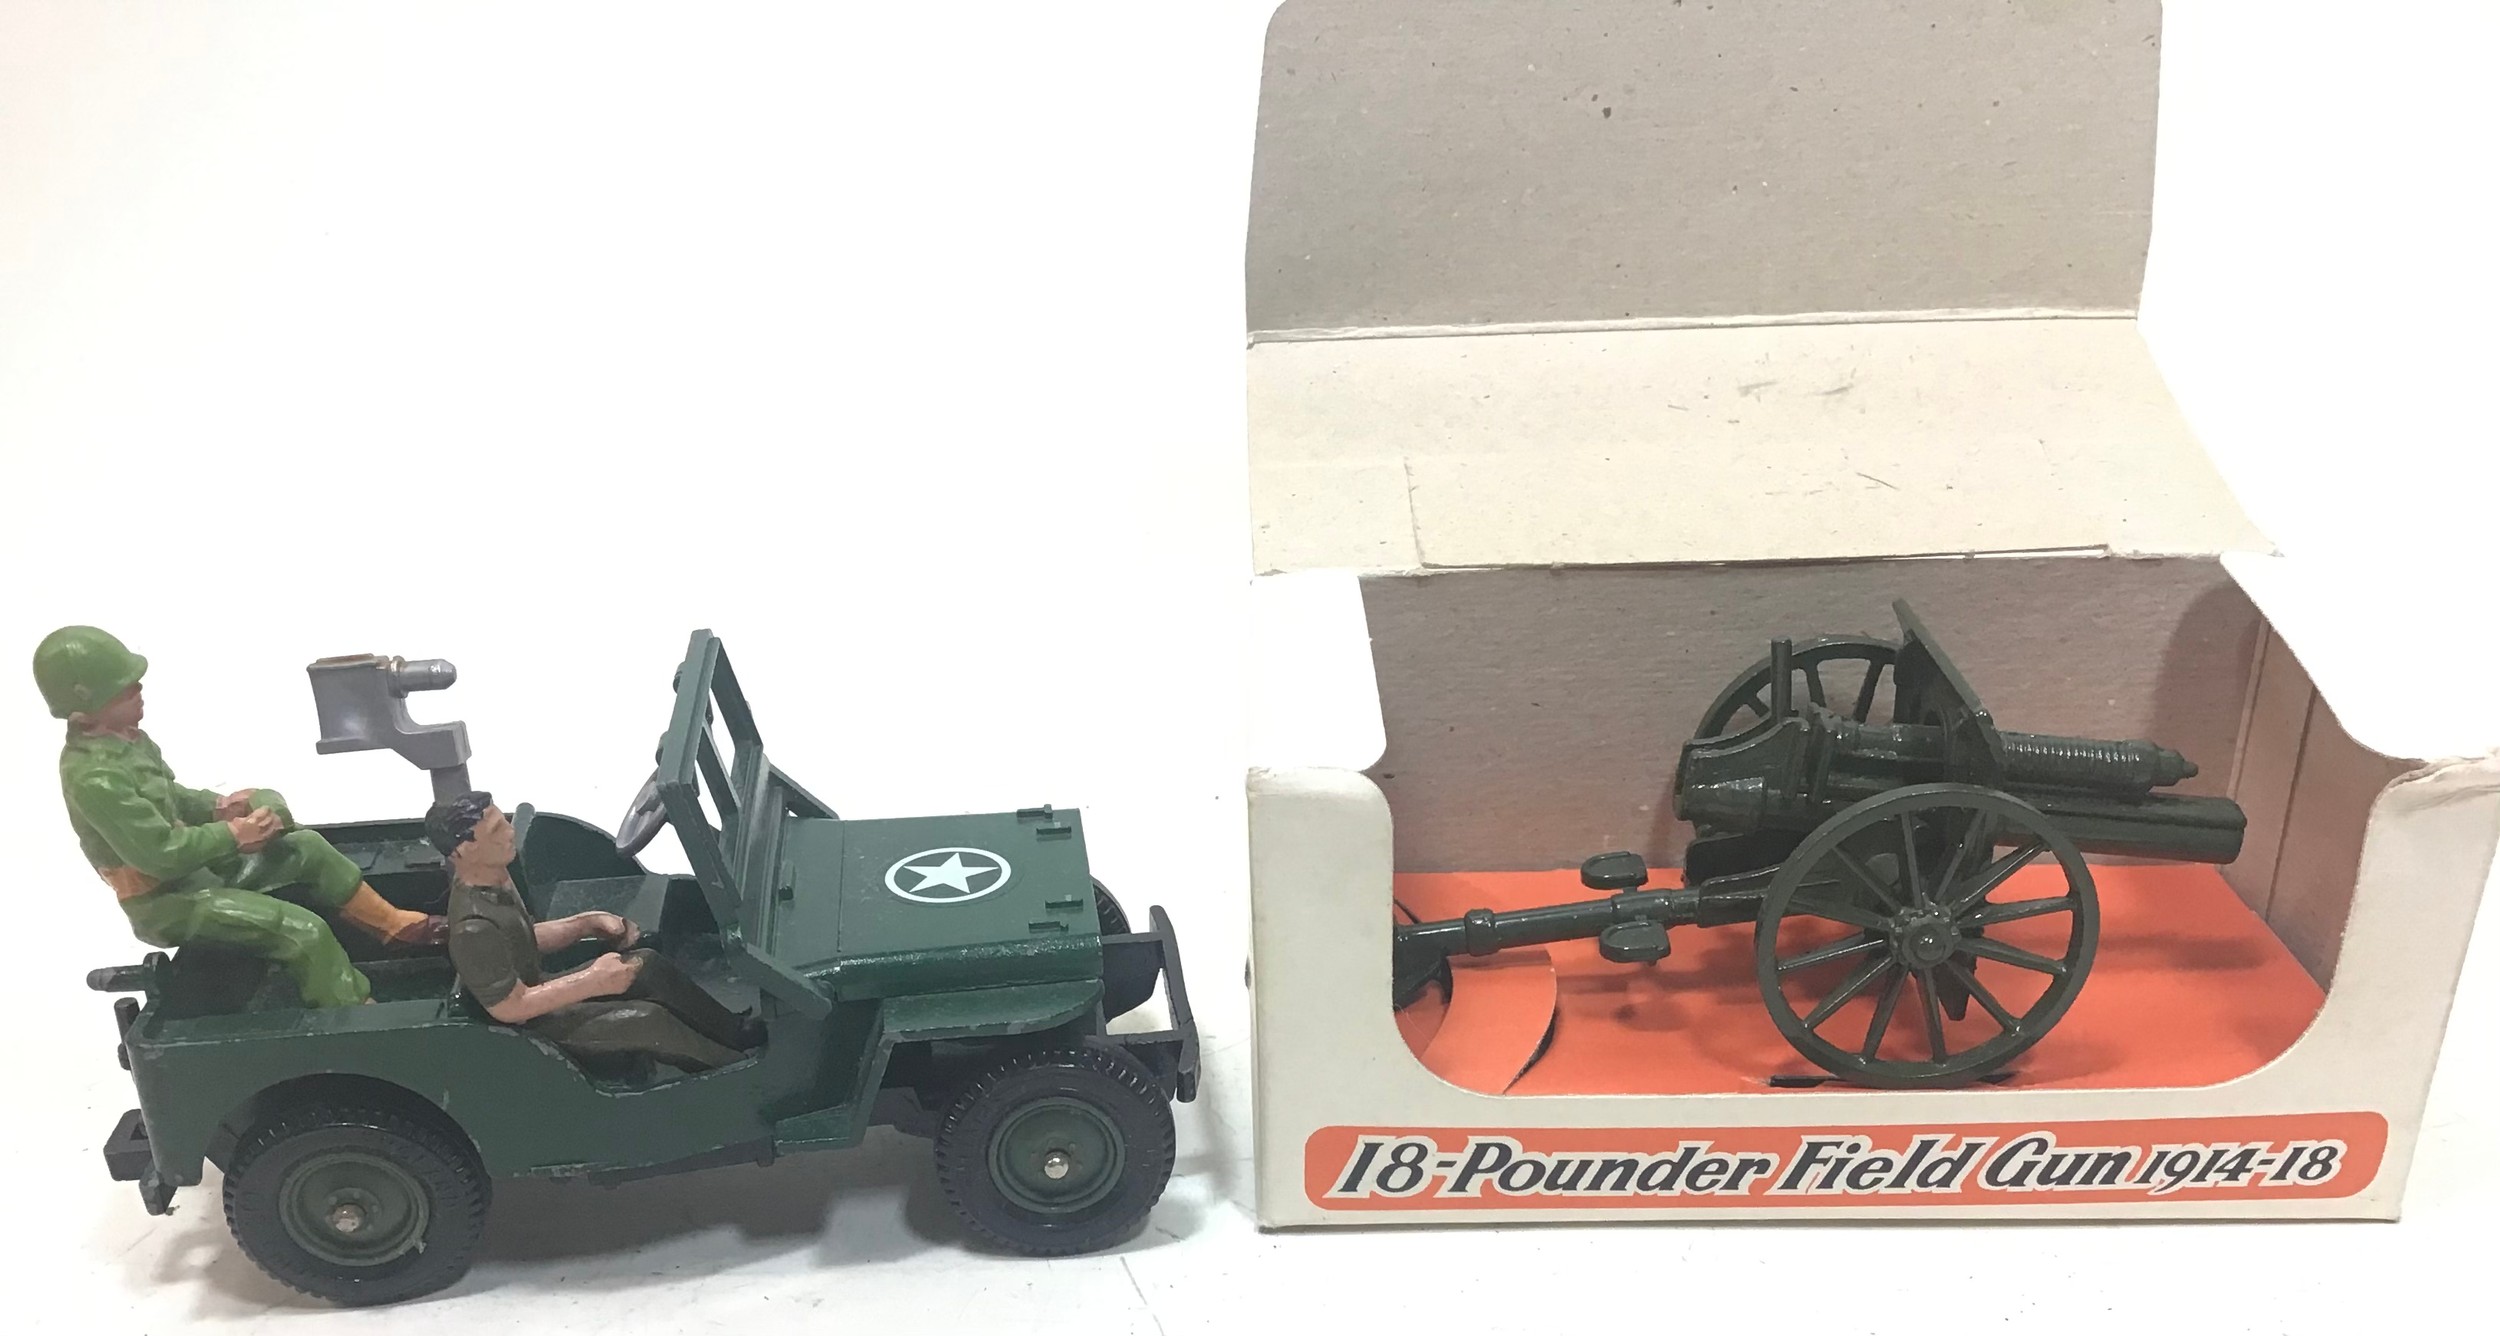 Britains American jeep (unboxed) with a Crescent 18" field gun